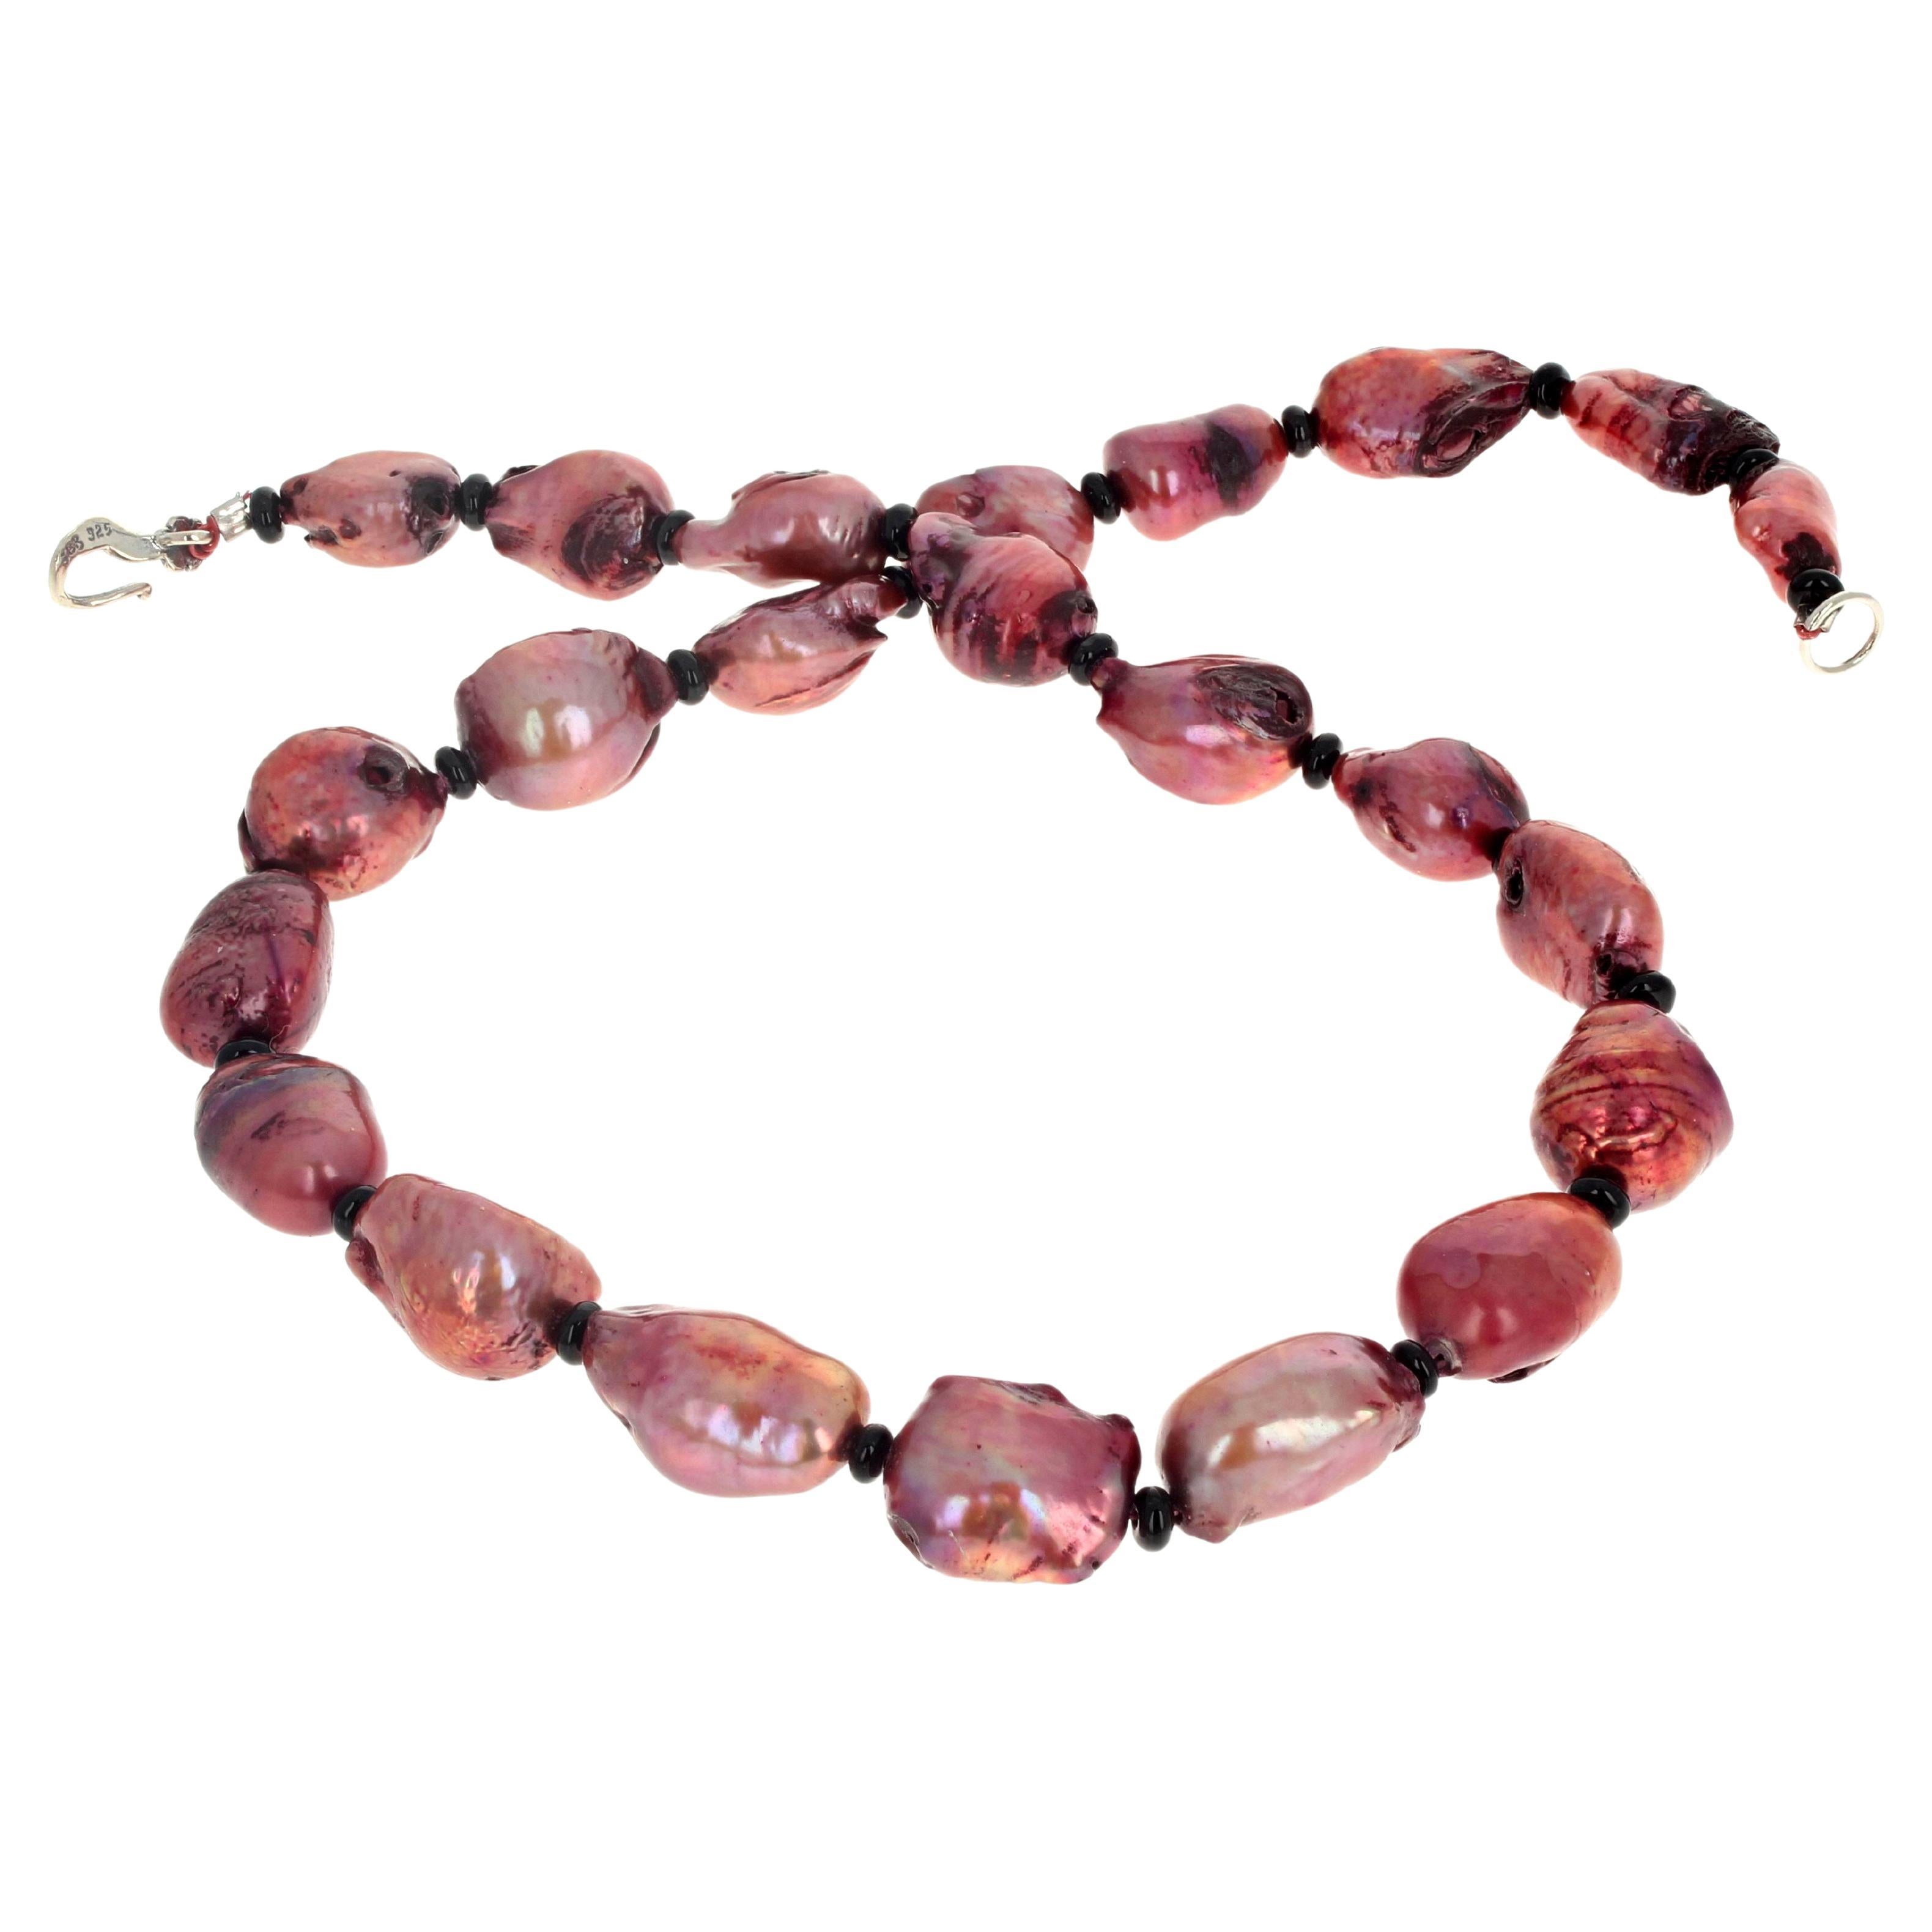 AJD Very Rare Glowing Coppery Pink Cultured Pearl Necklace For Sale